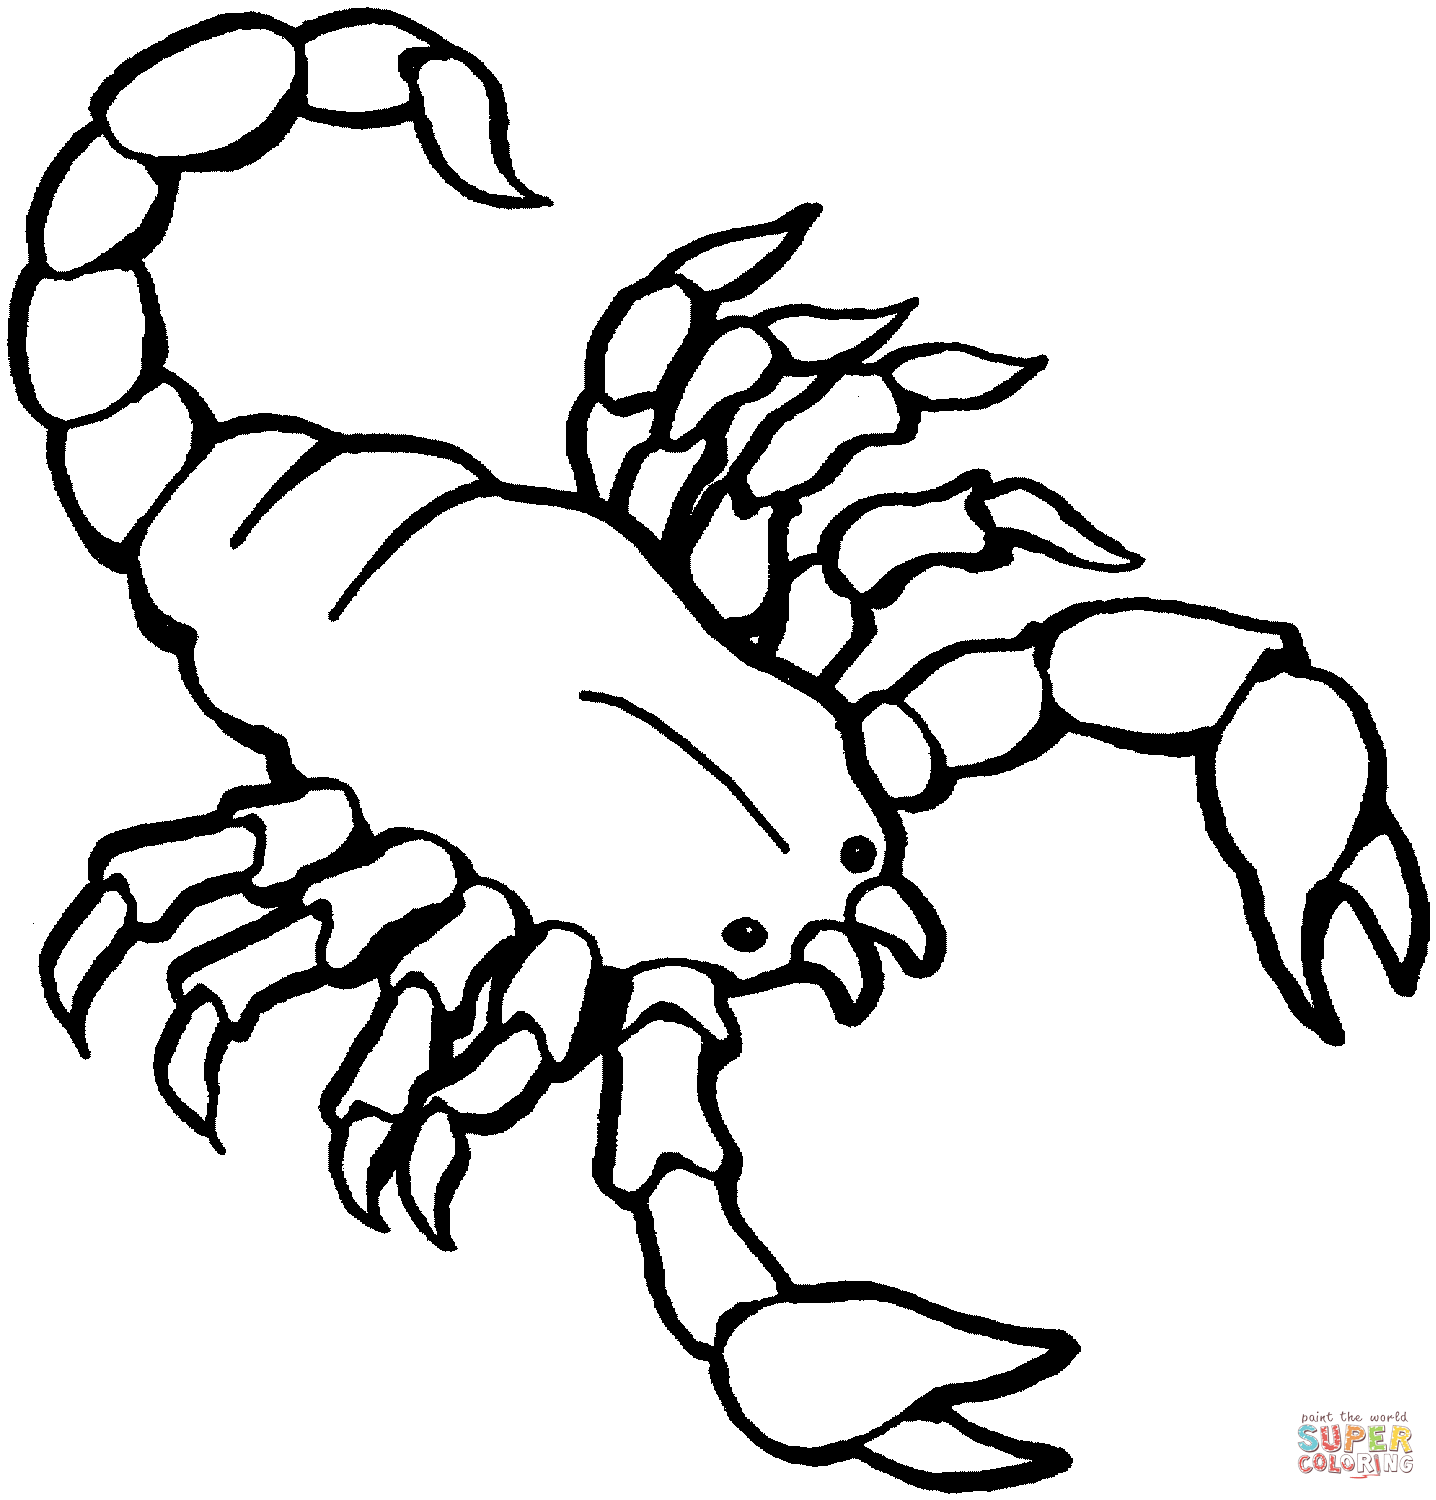 Scorpion coloring pages to download and print for free